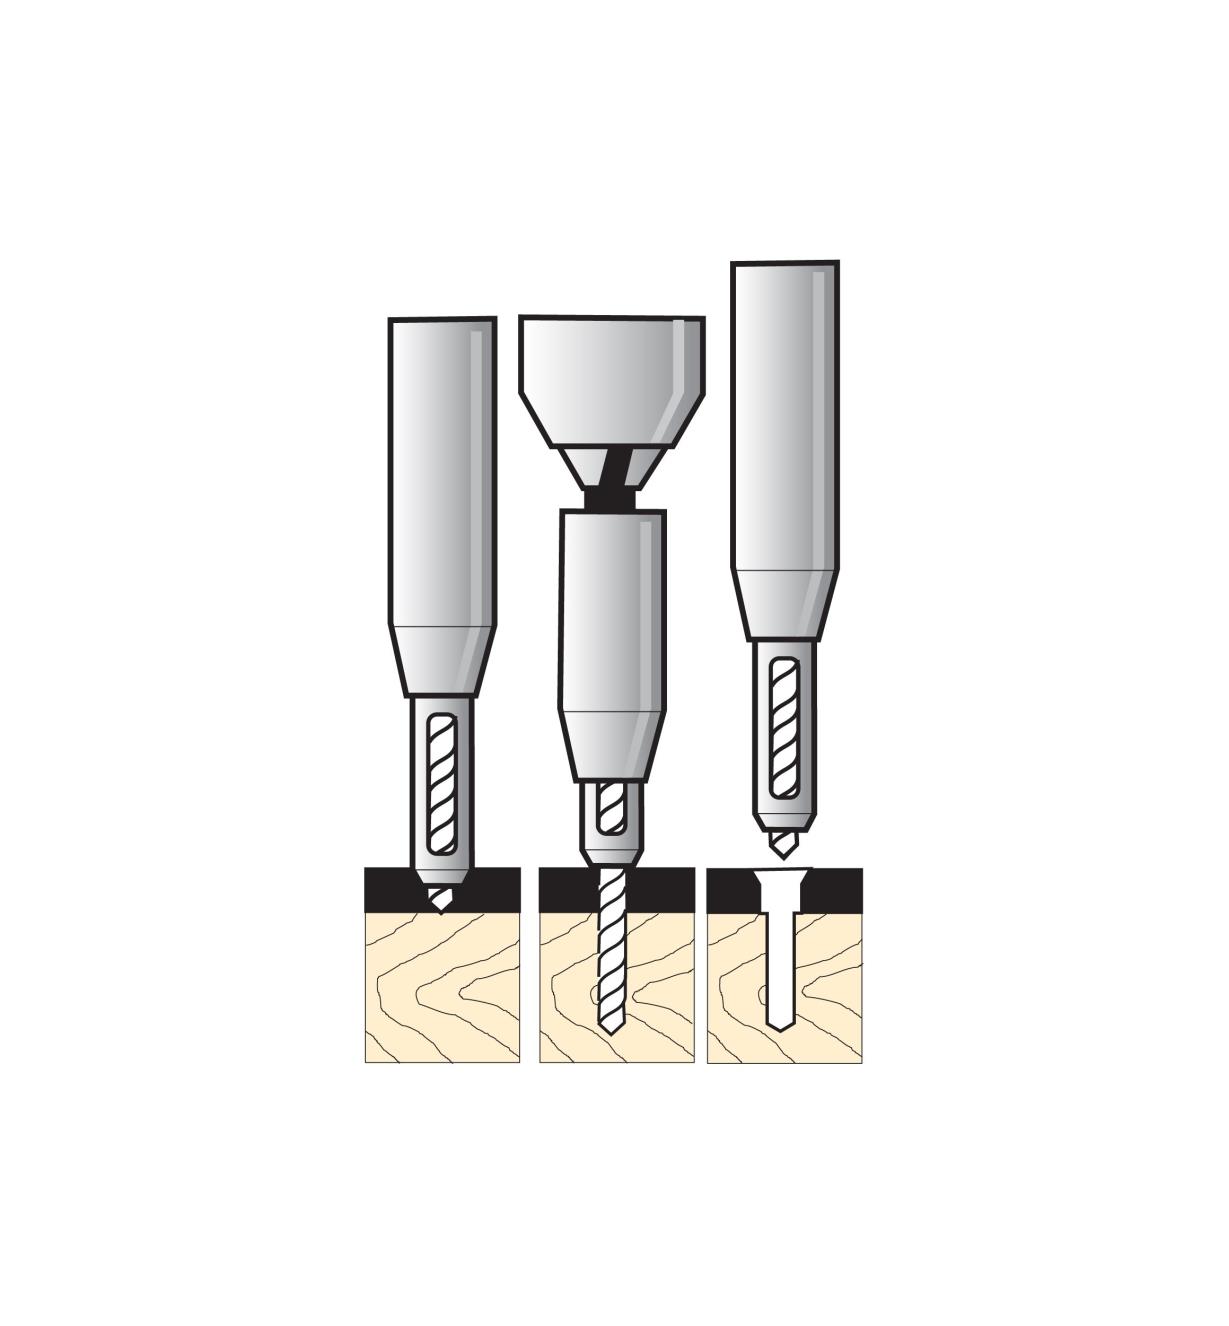 Illustration showing how to drill a hole with a centering bit